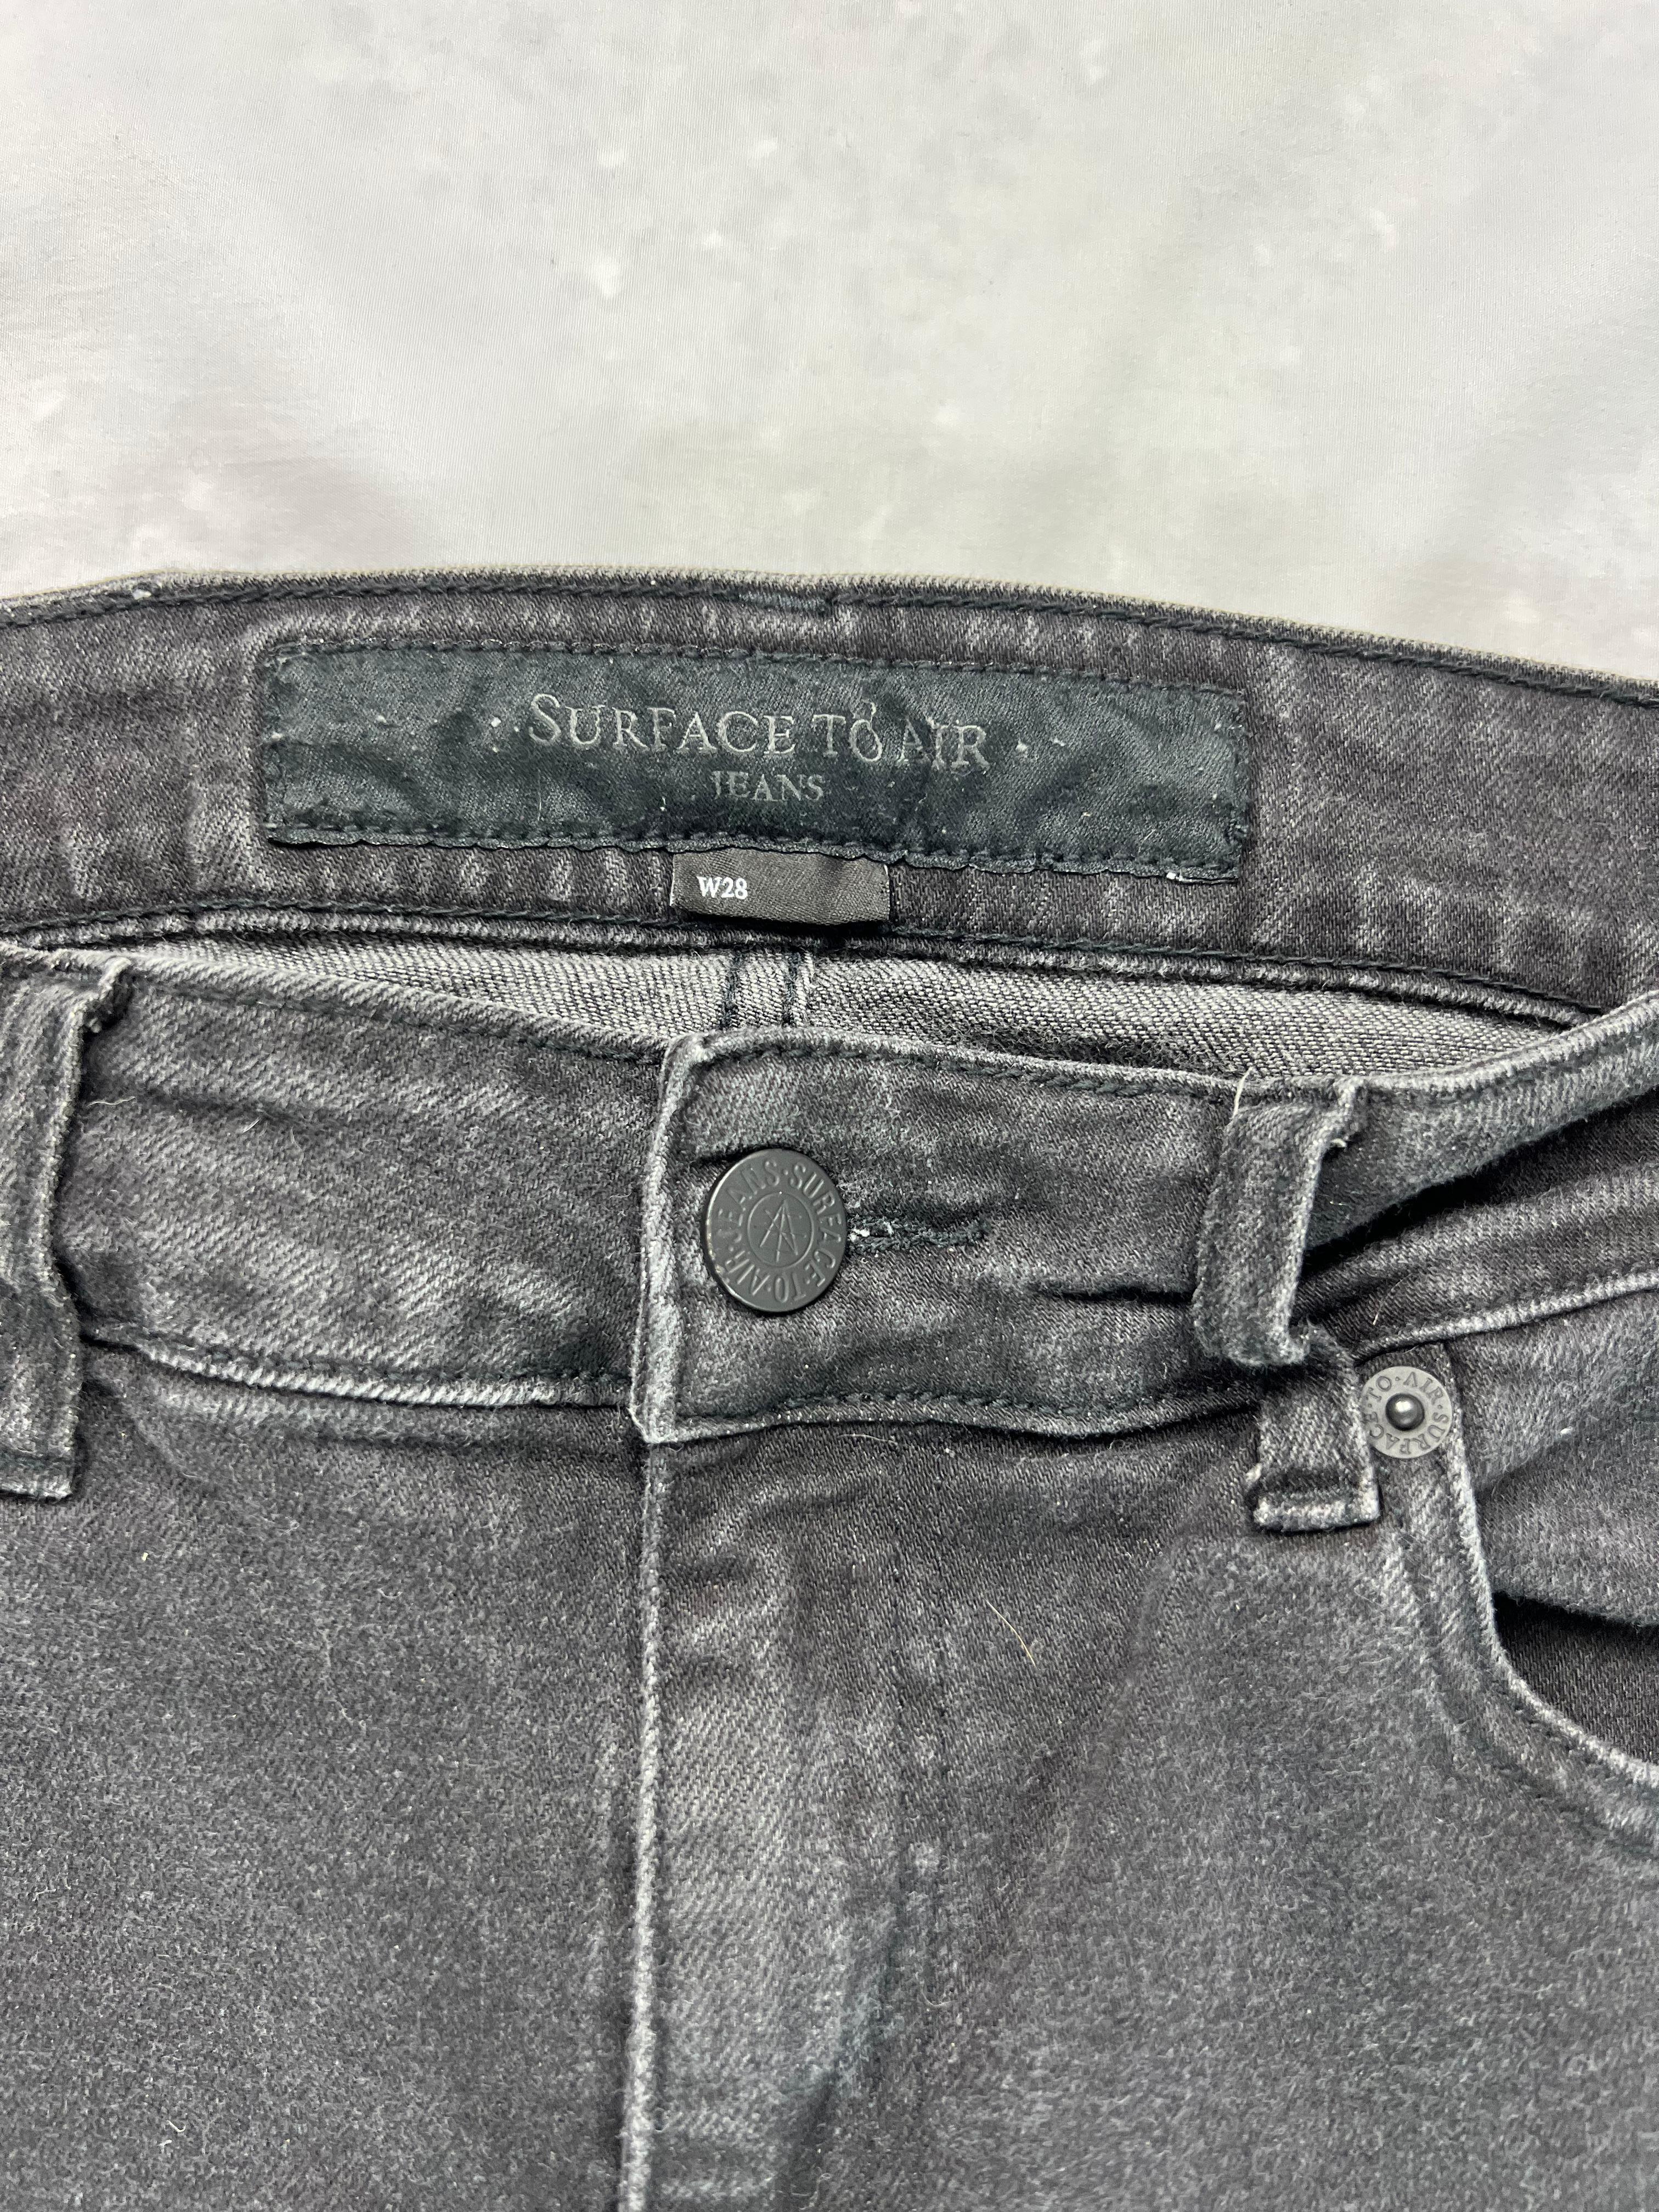 Product details:

The jeans feature dark blue and dark grey wash and skinny fit.